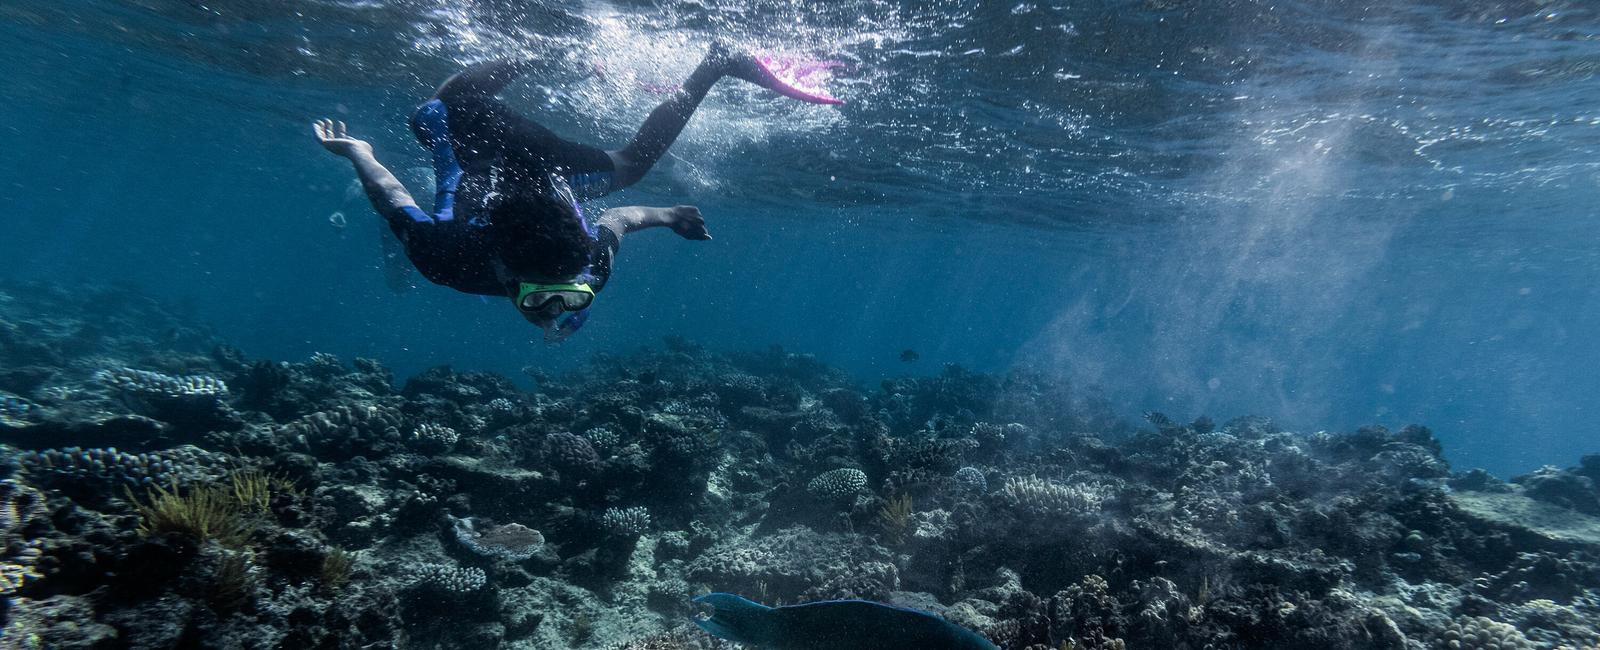 Since 1995 the great barrier reef has lost over half its coral because of climate change scientists have found that every type of coral on the reef system has suffered due to warmer seas